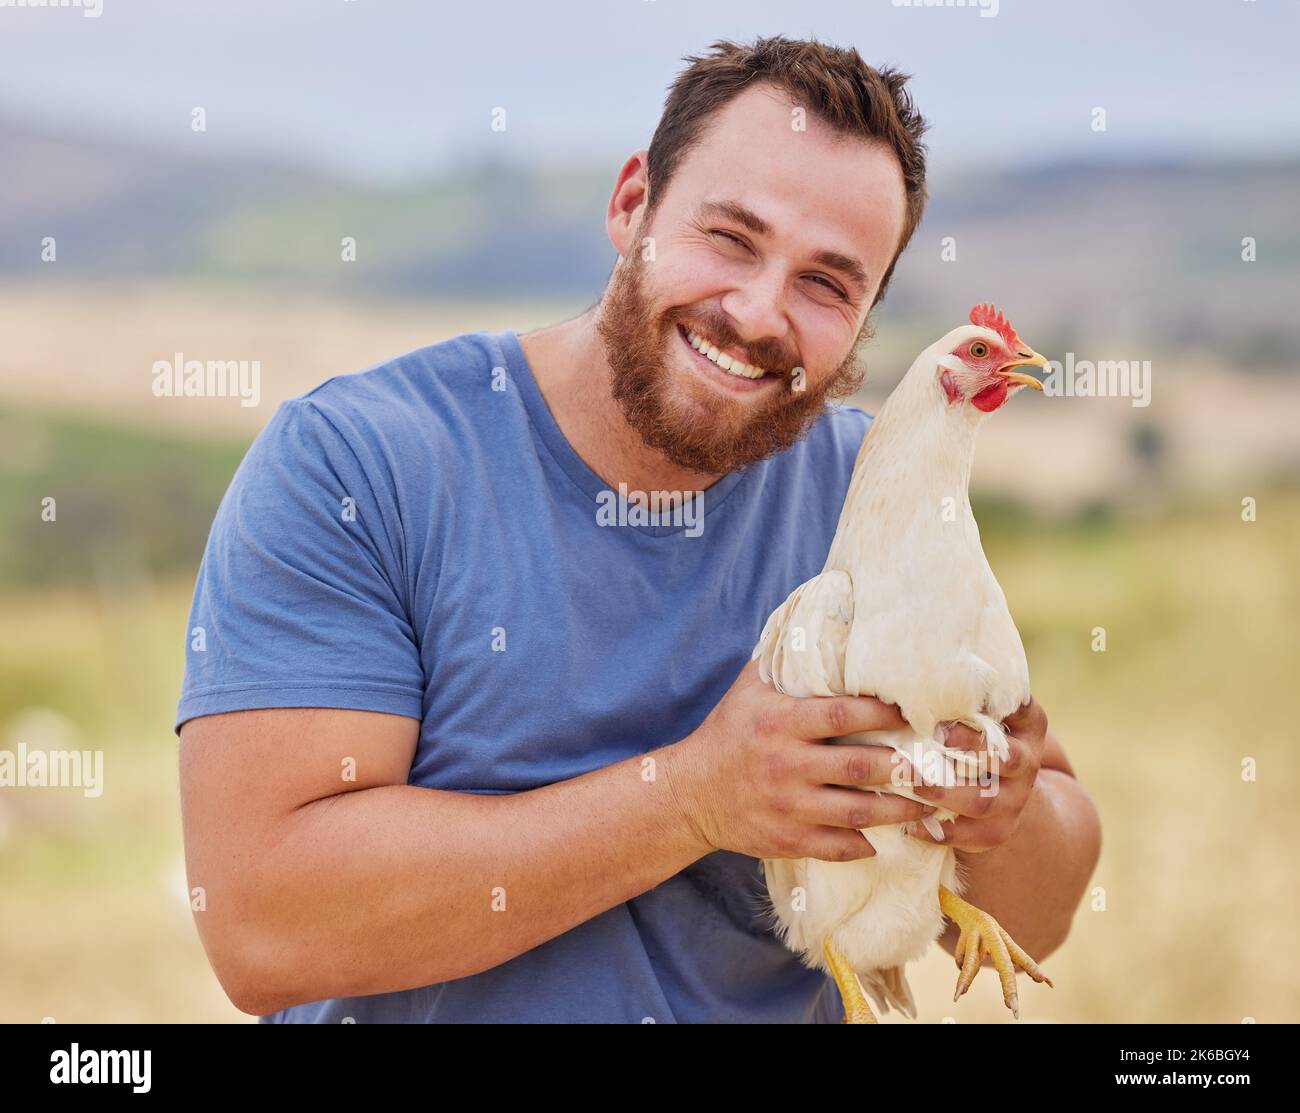 This ones a spring chicken. Portrait of a young man working on a poultry farm. Stock Photo